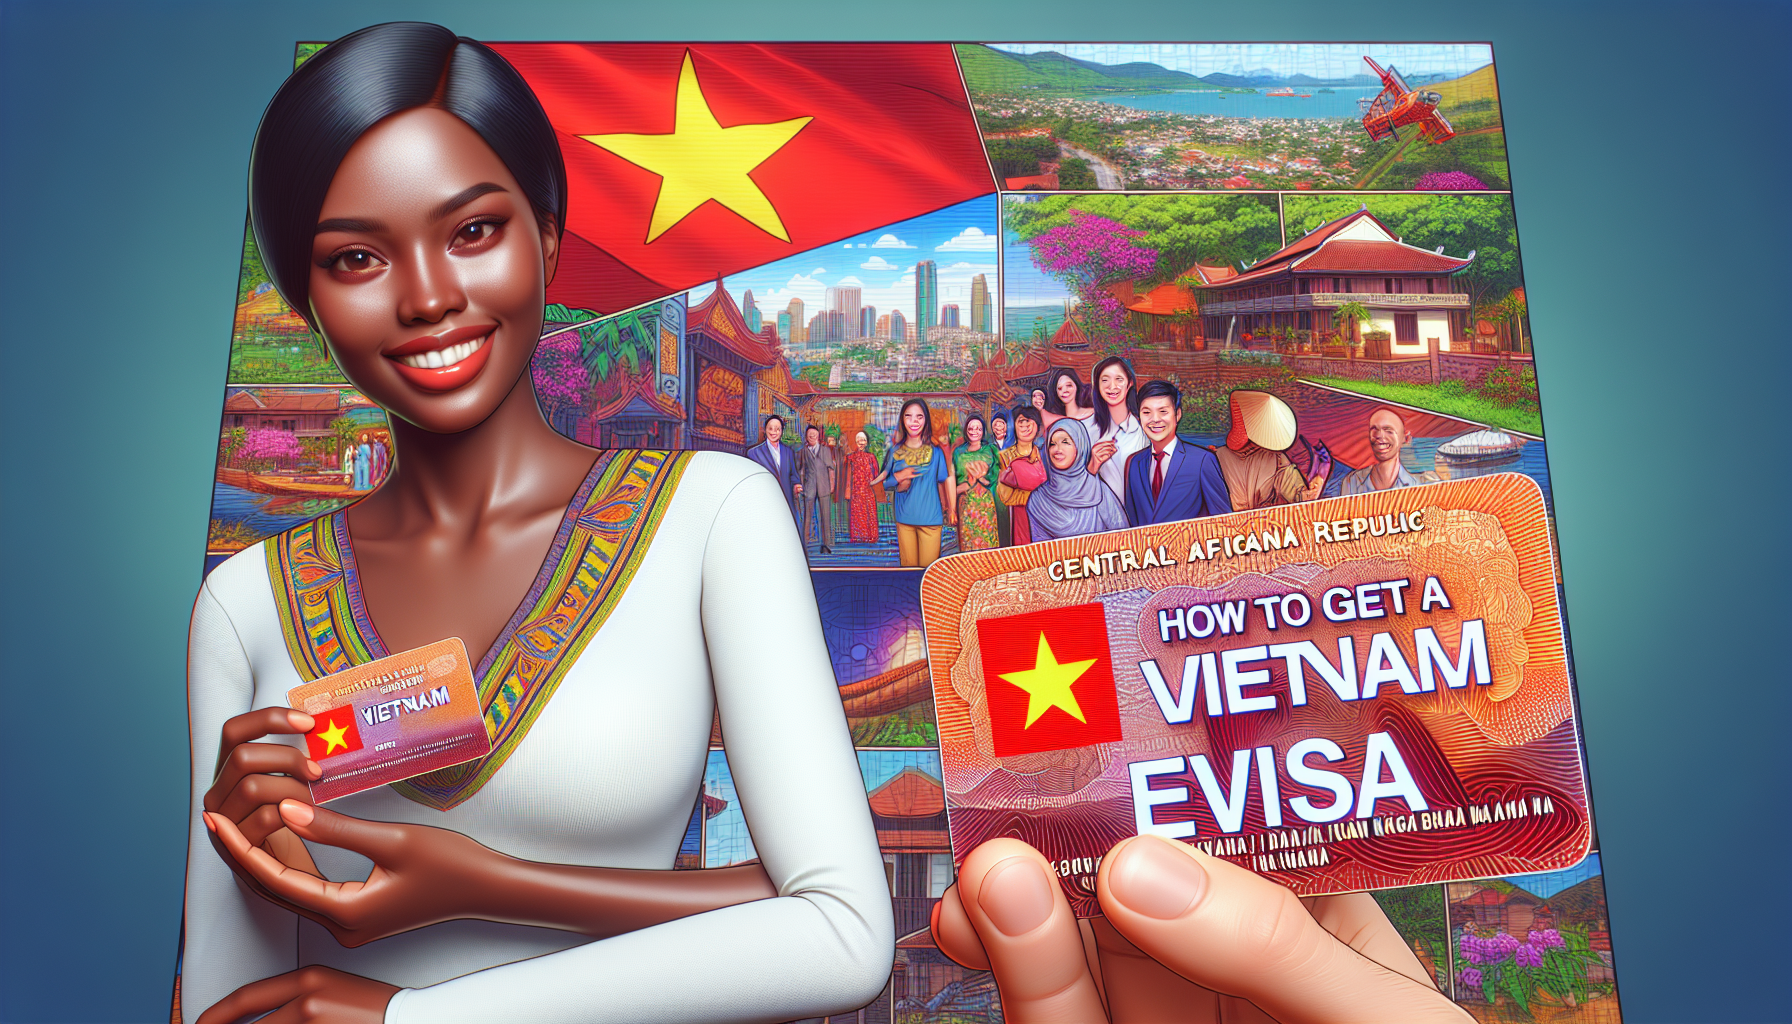 Vietnam Evisa for Citizens from Central African Republic